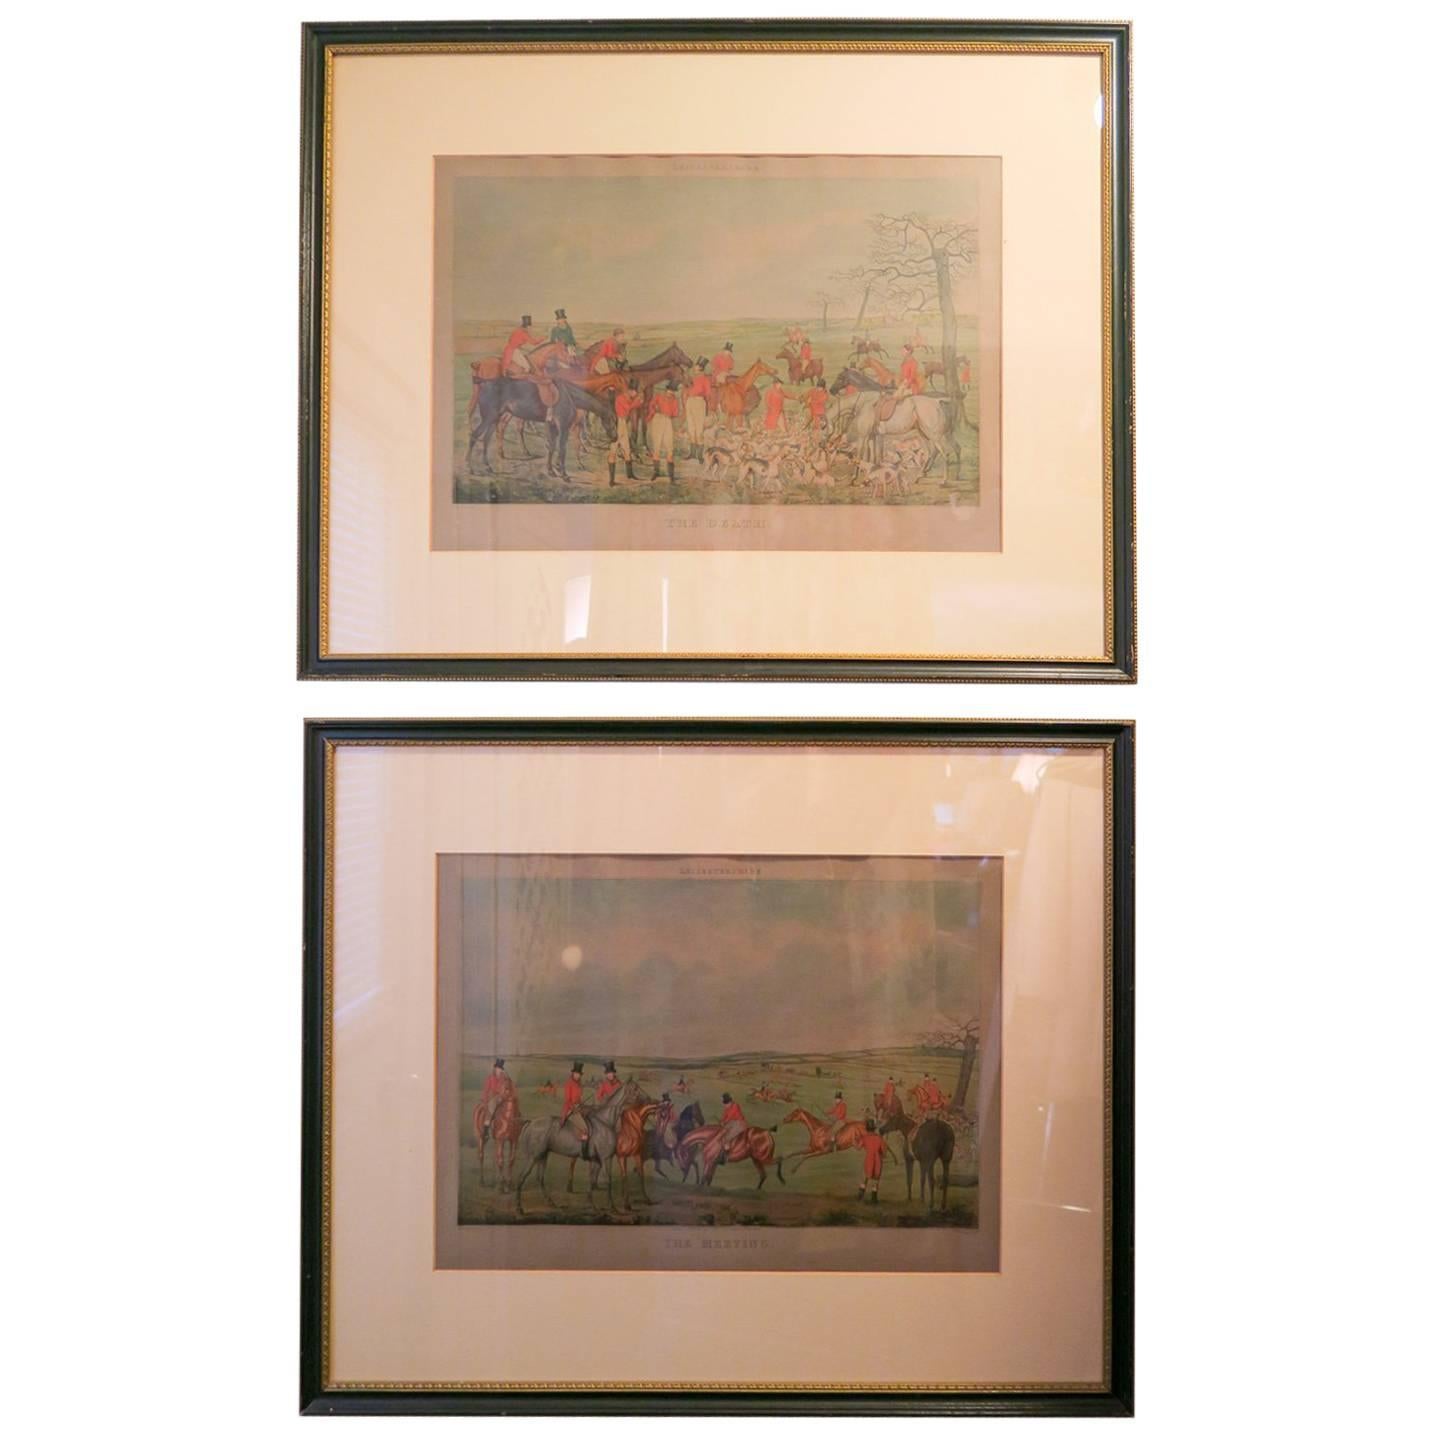 ON SALE NOW!  Henry Alken the Meeting and the Death Etchings  For Sale